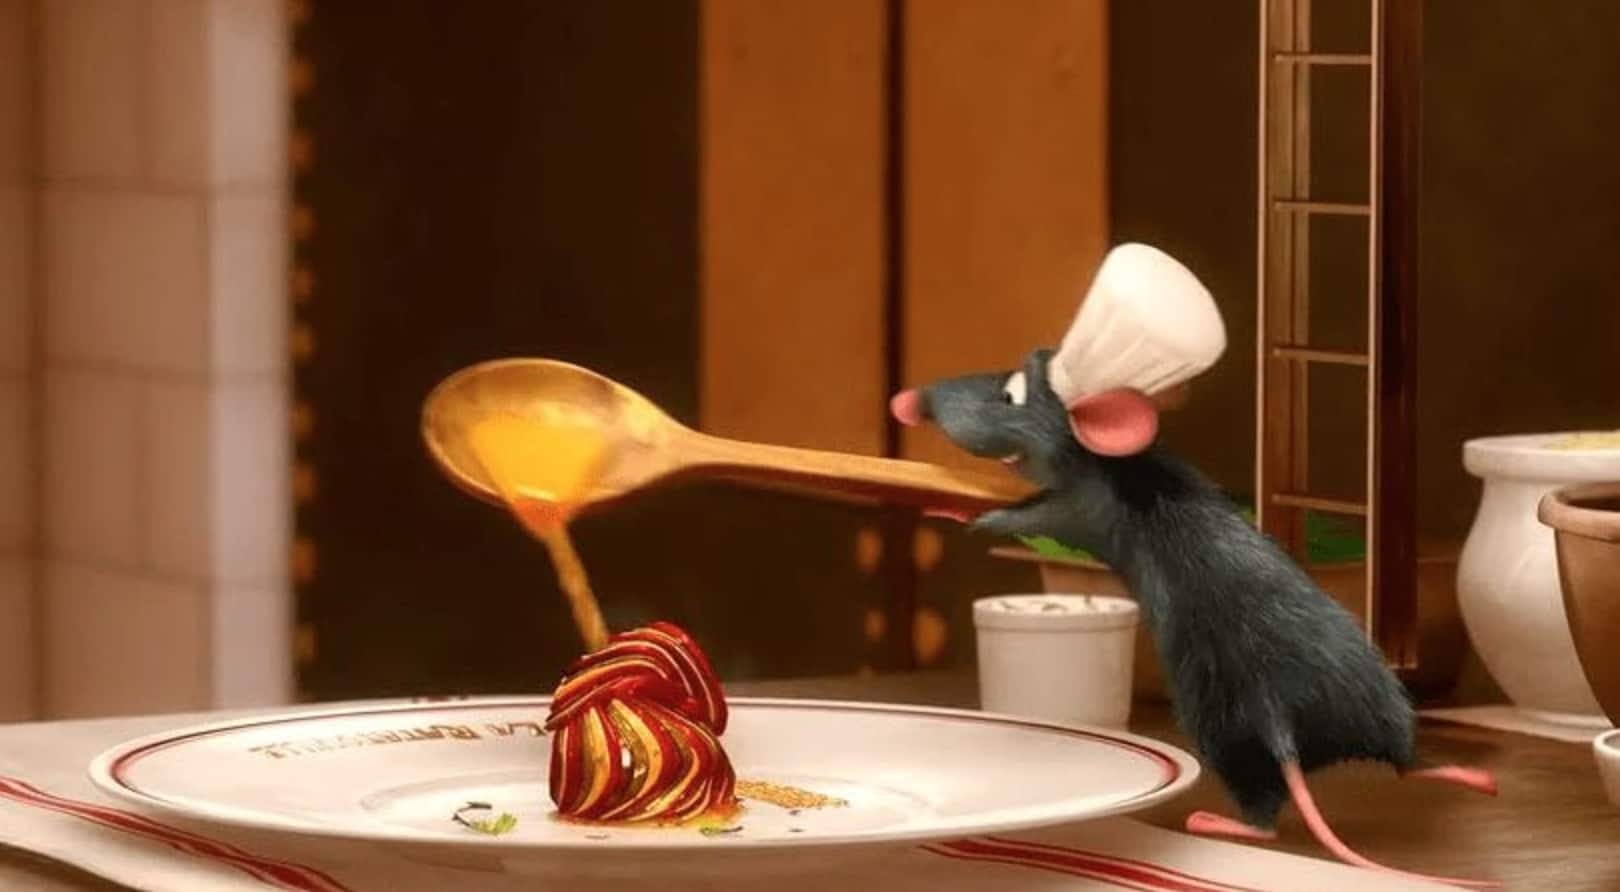 An animated rat pours sauce onto a plate in this image from Pixar Animation Studios.